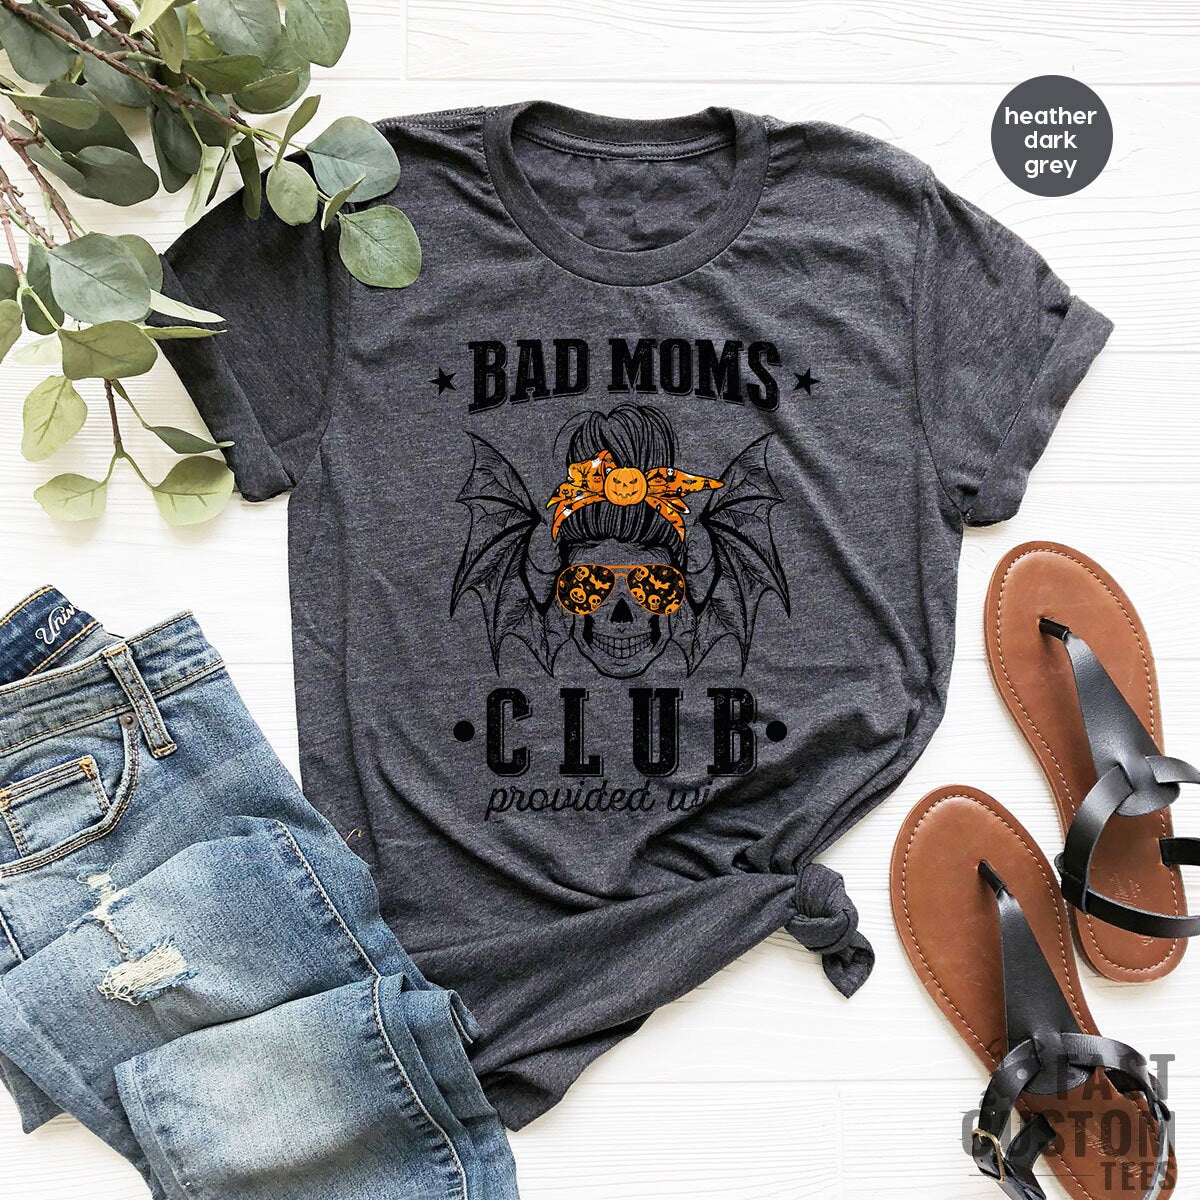 Funny Mom Shirt, Mothers Day Shirt, Gift For Mama, Bad Moms Club Provided Wine T Shirt, Wine Lover Mom TShirt, New Mom Gifts - Fastdeliverytees.com